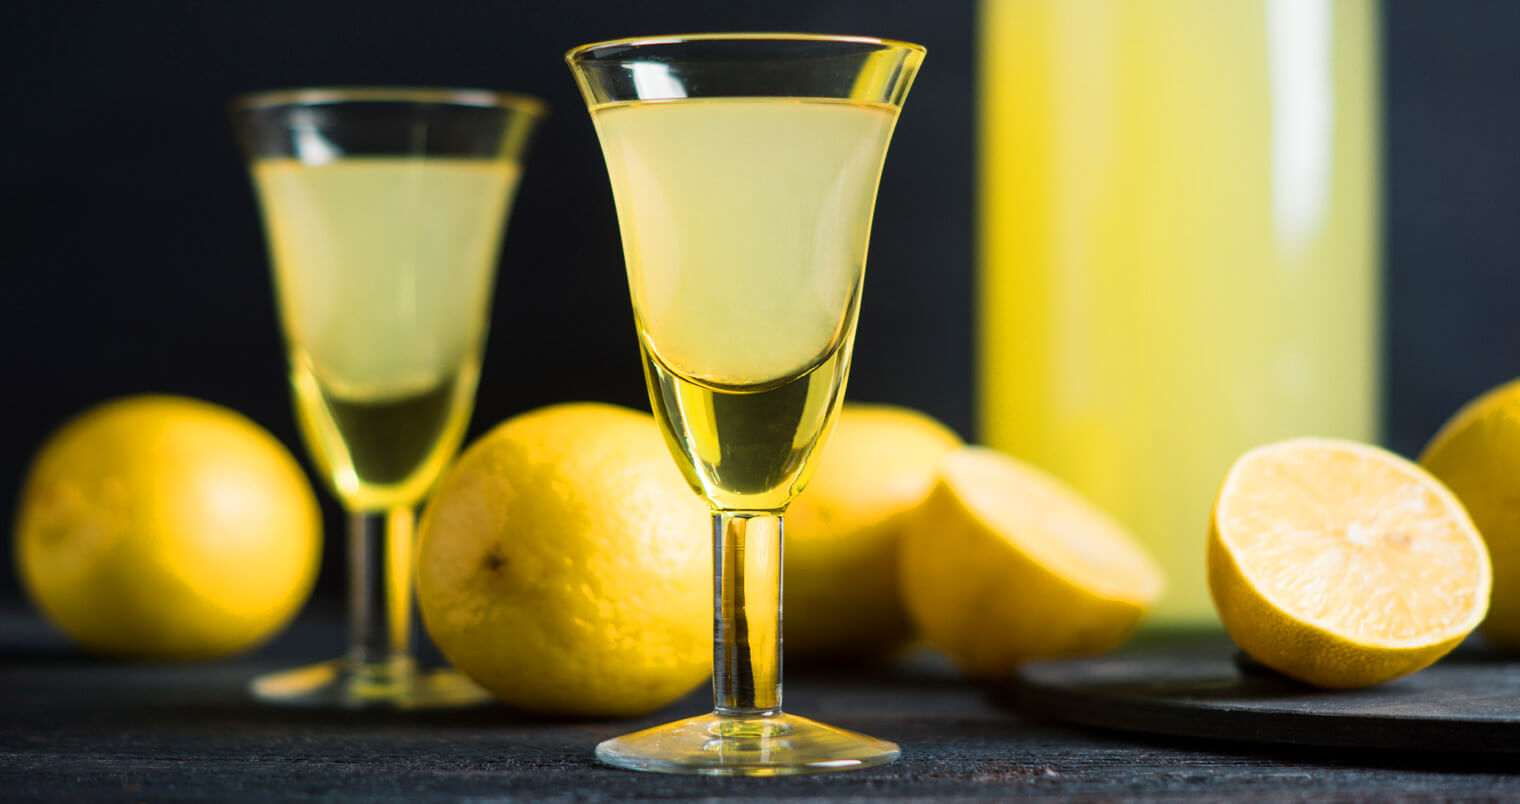 Villa Massa Limoncello: Sharing A Family Recipe what's chilling right now, featured image